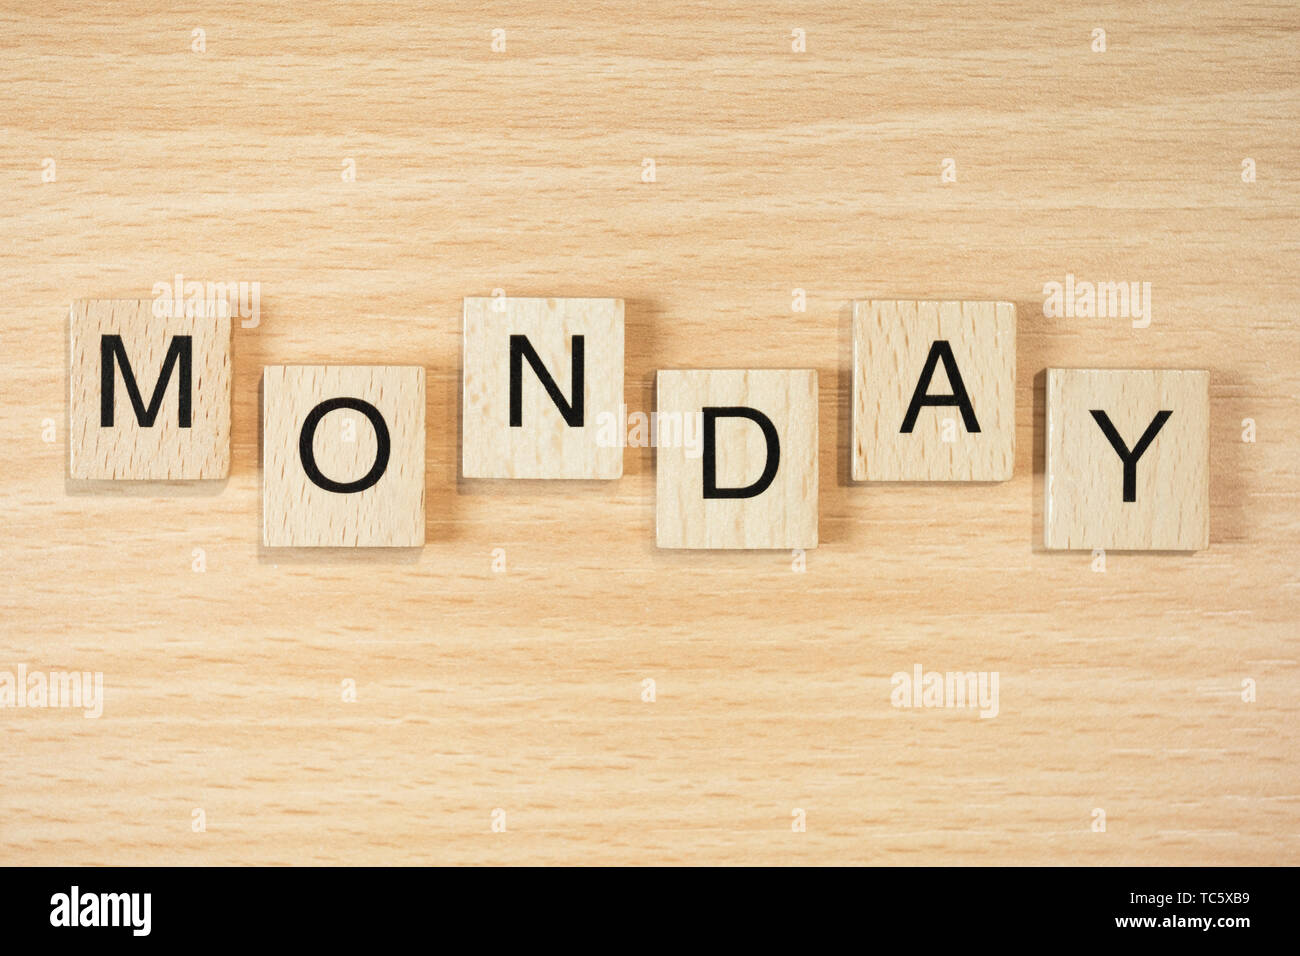 The word Monday, spelt out using wooden tiles on a wood effect background. Stock Photo